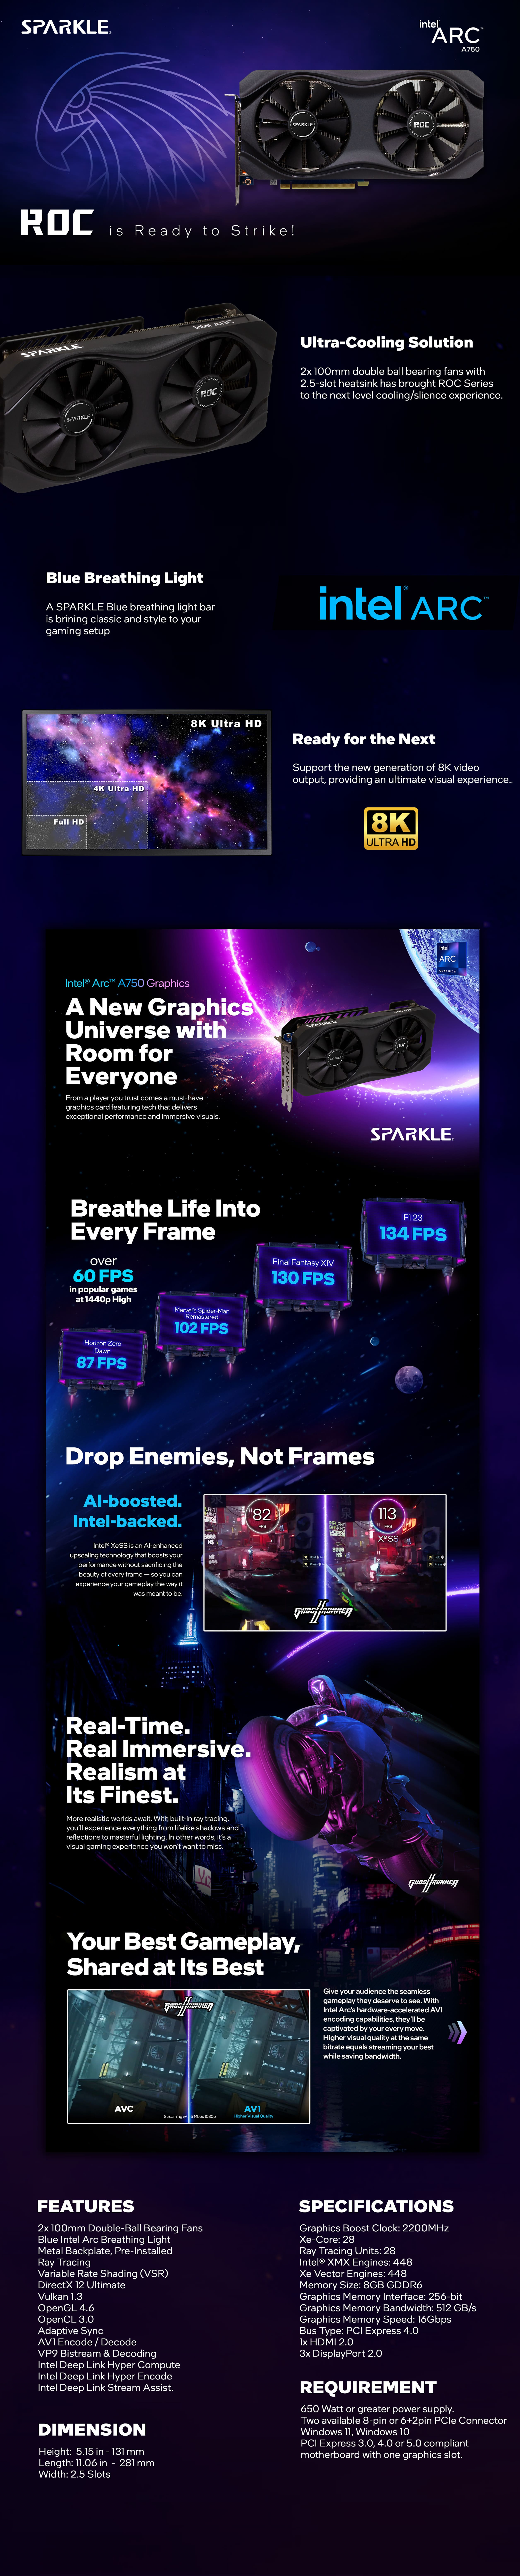 A large marketing image providing additional information about the product SPARKLE Intel Arc A750 ROC OC 8GB GDDR6 - Black - Additional alt info not provided